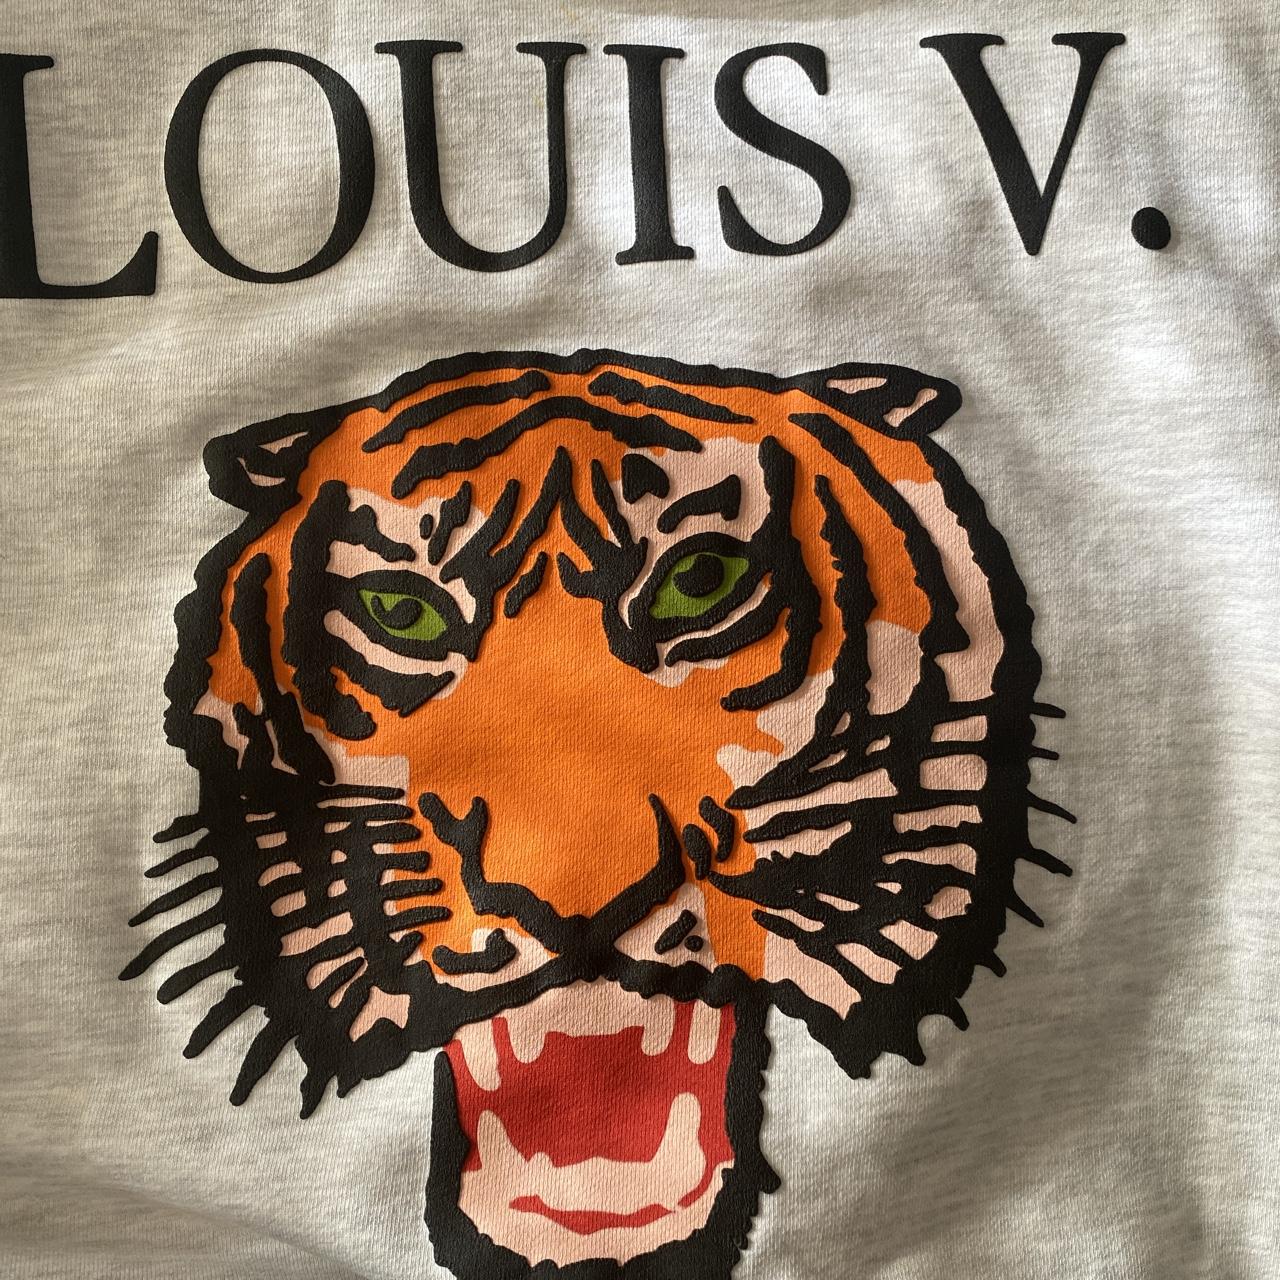 Chinatown market LV print hoodie Ordered wrong size - Depop